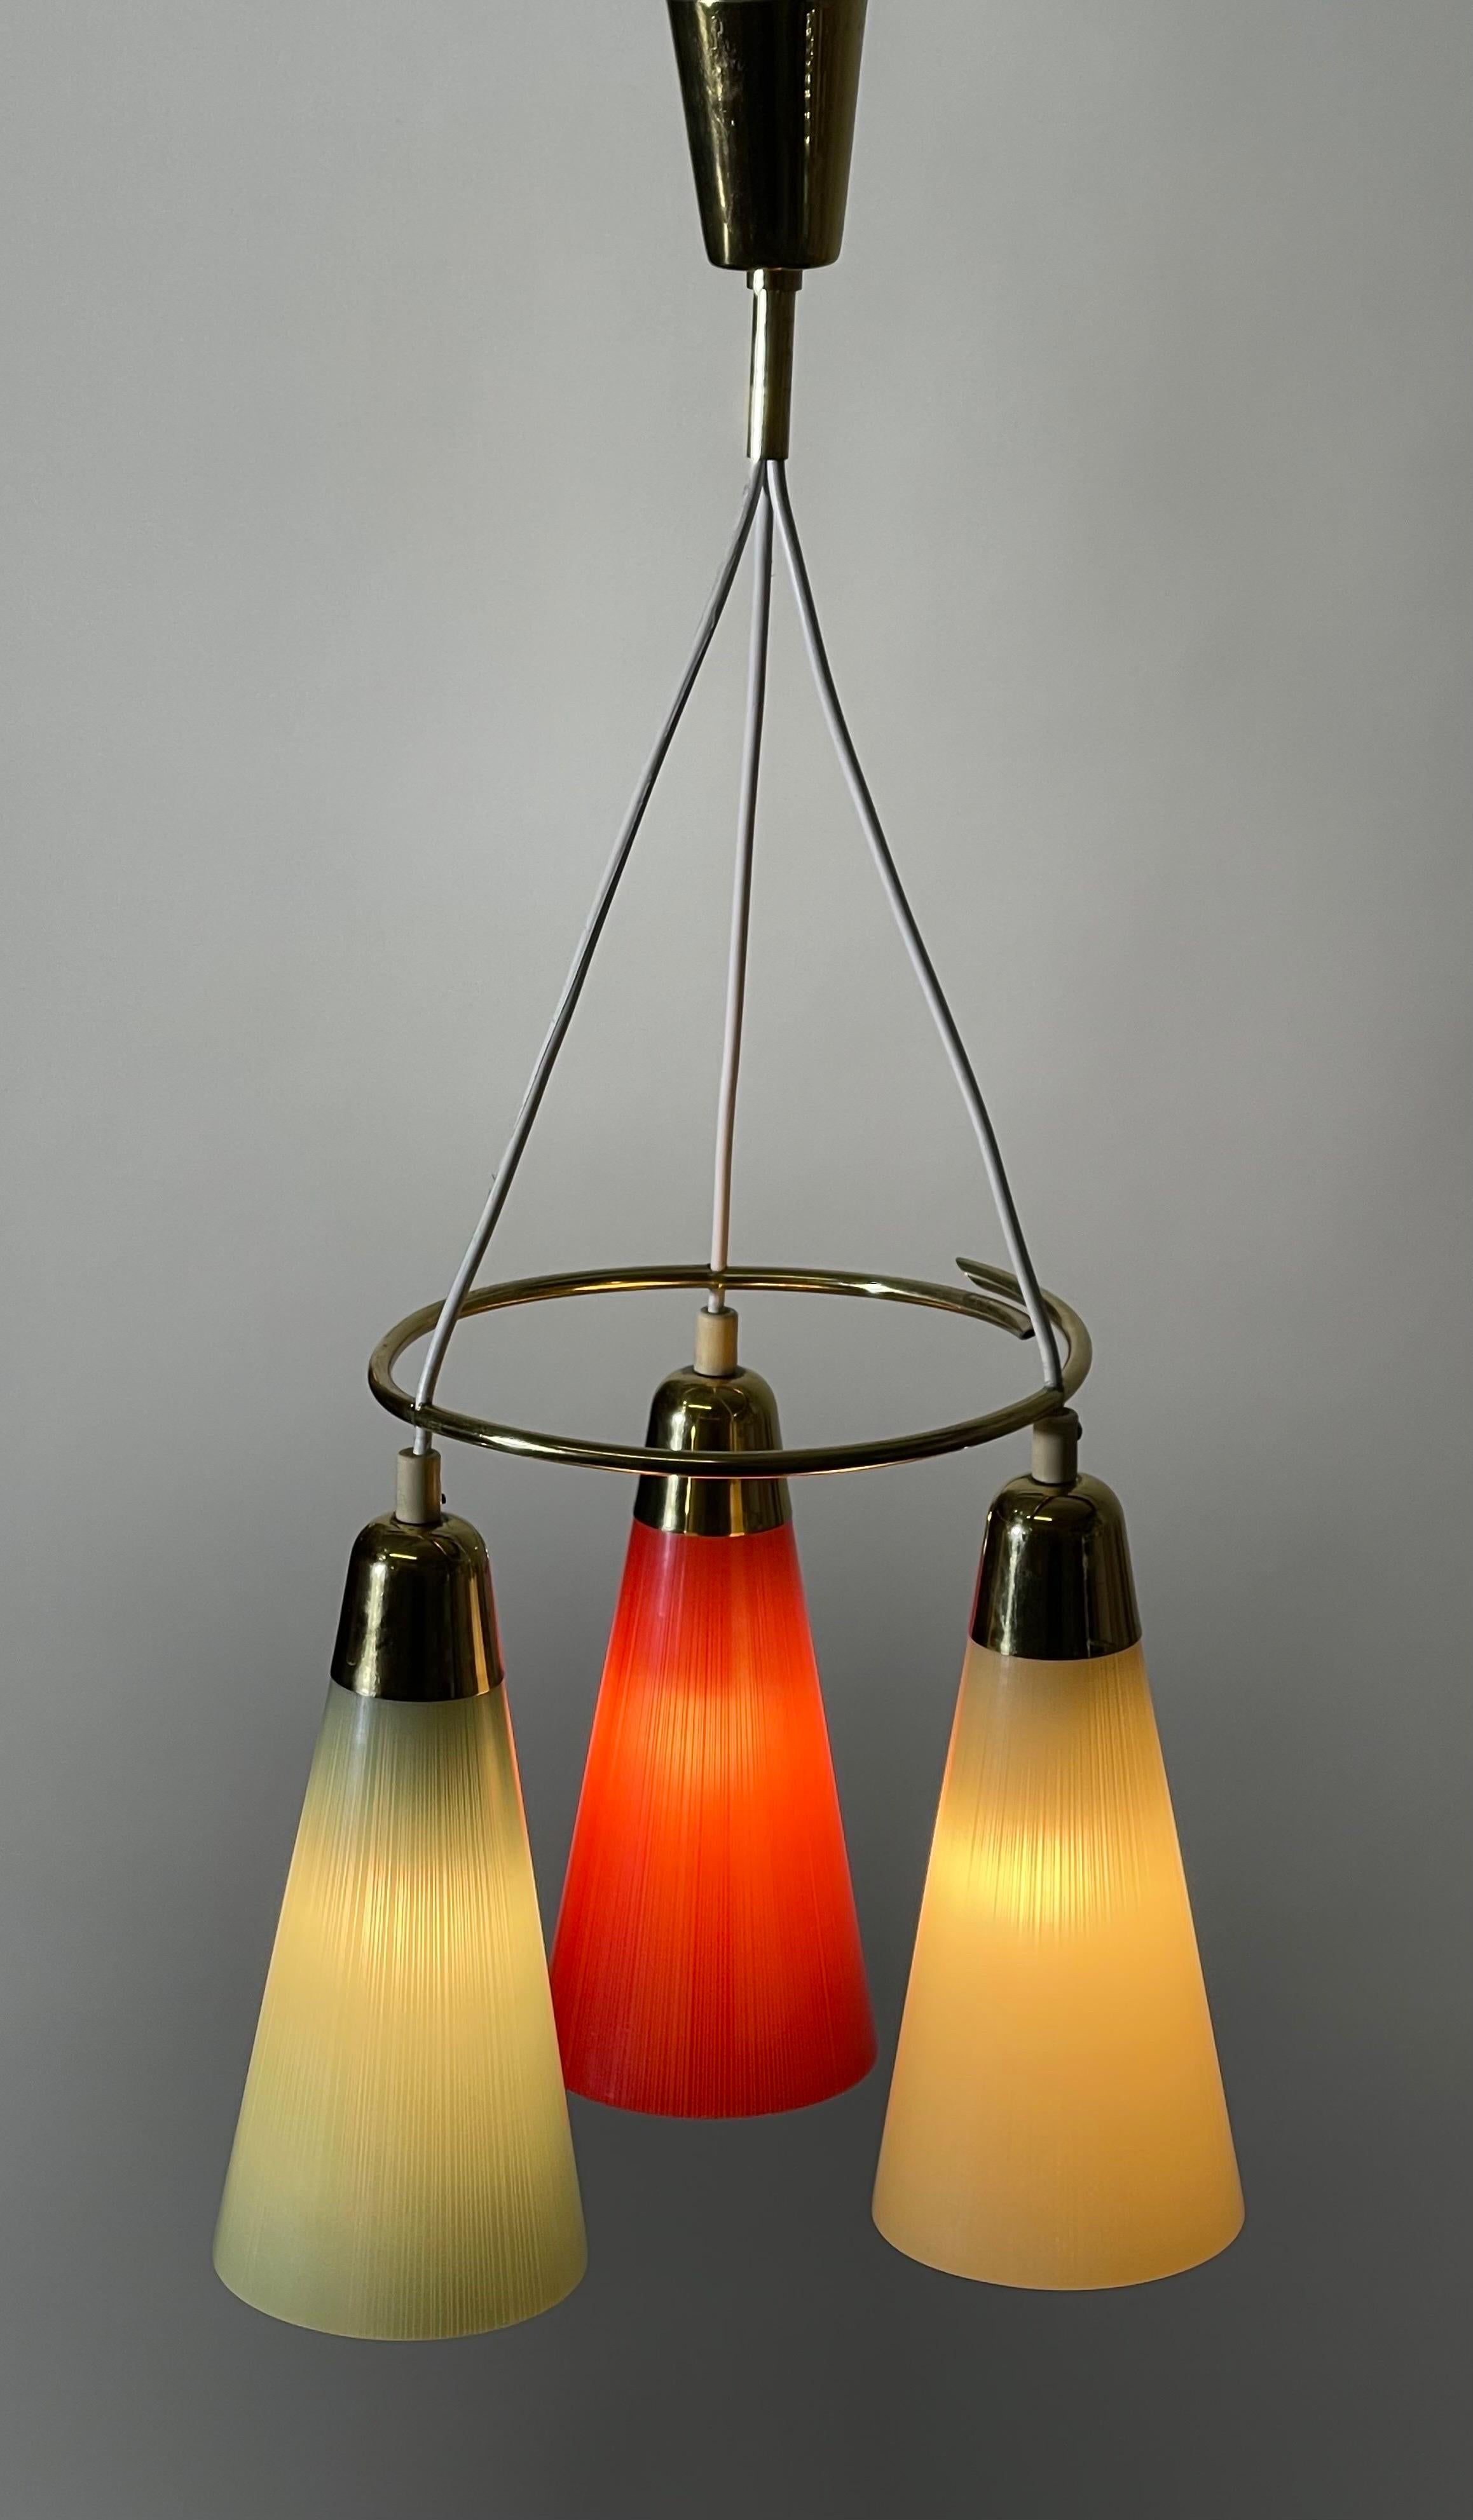 Mid - Century polished brass and multicolor pendant in the style of Stilnovo.
Socket: 3 x e14 for standard screw bulbs.